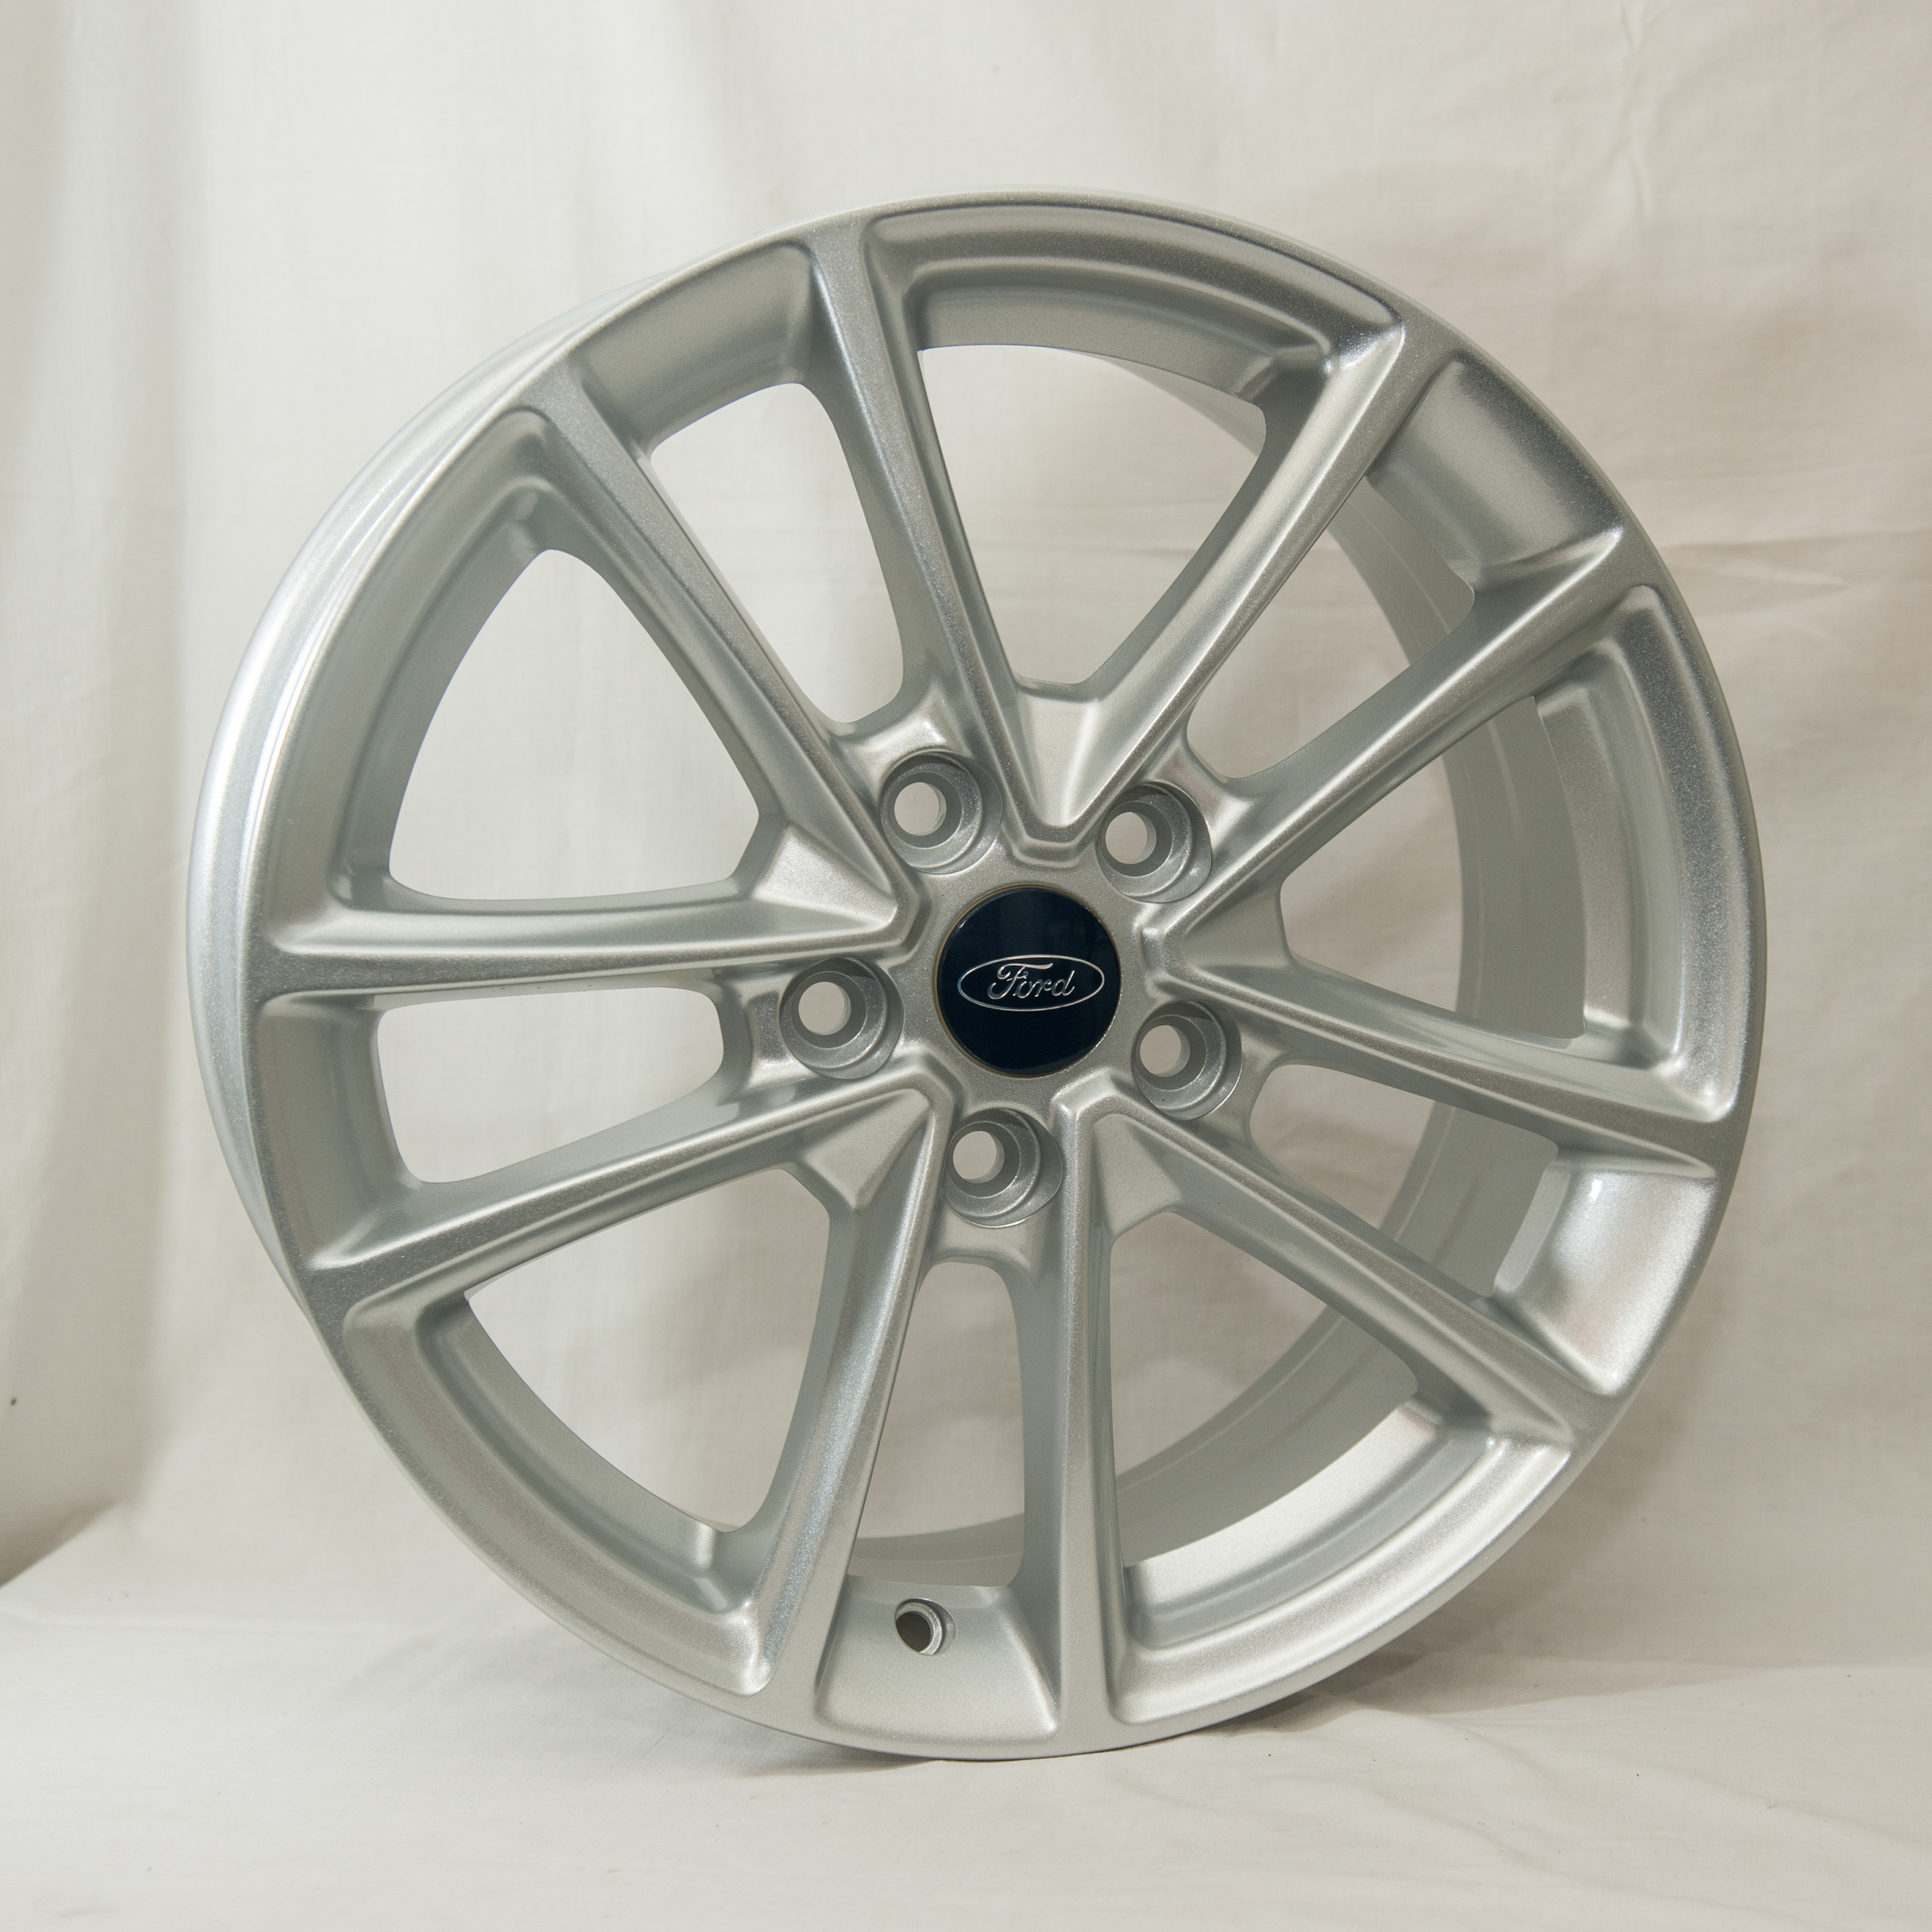 Ford GT166136 7x16 5x108 ET50 DIA 63.4 silver